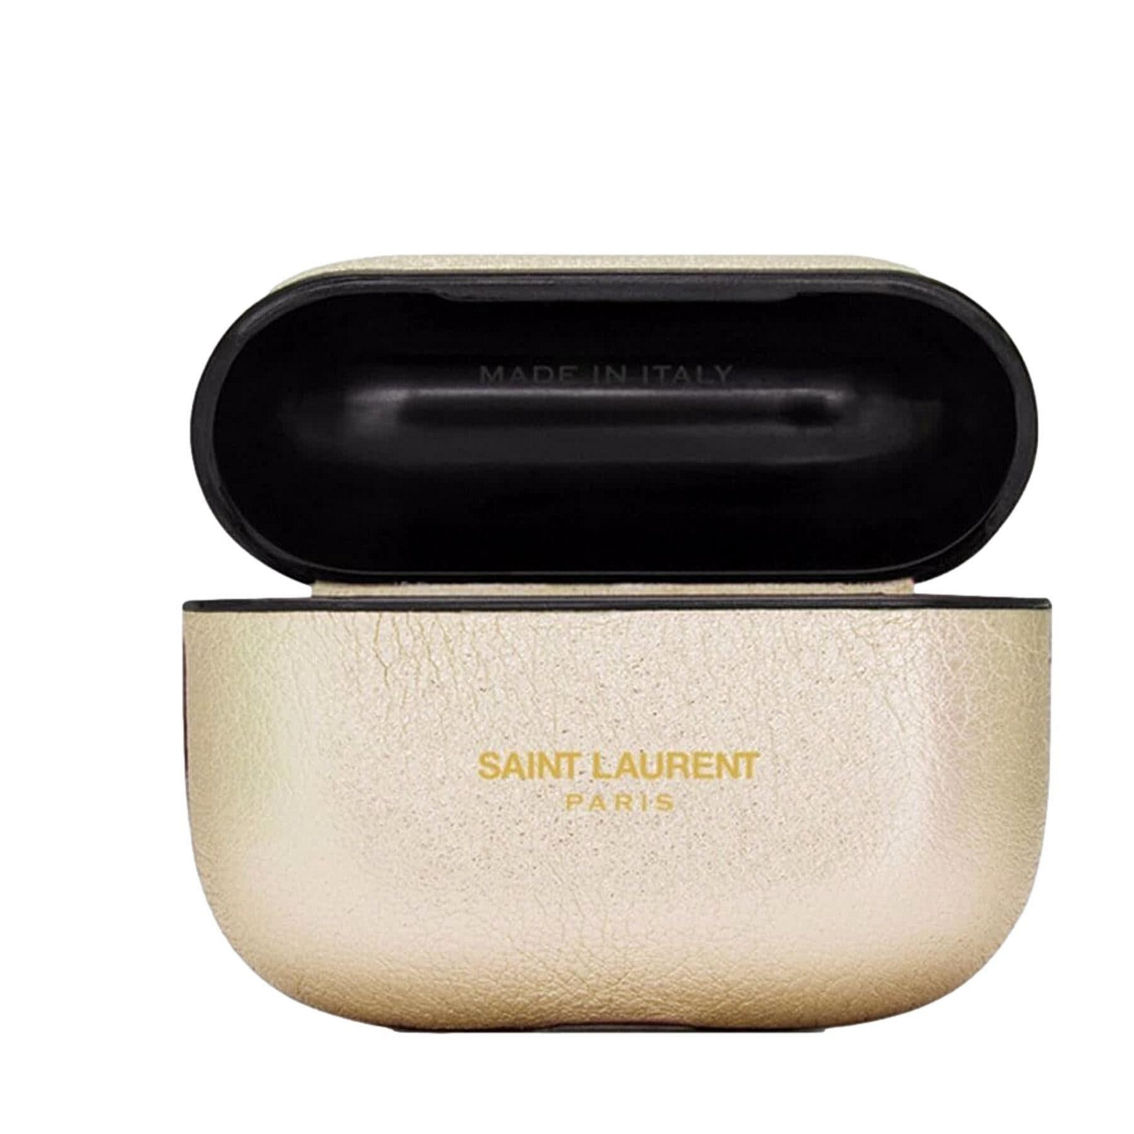 Saint Laurent Metallic Gold Leather Airpods Pro Case (New) - Image 5 of 5